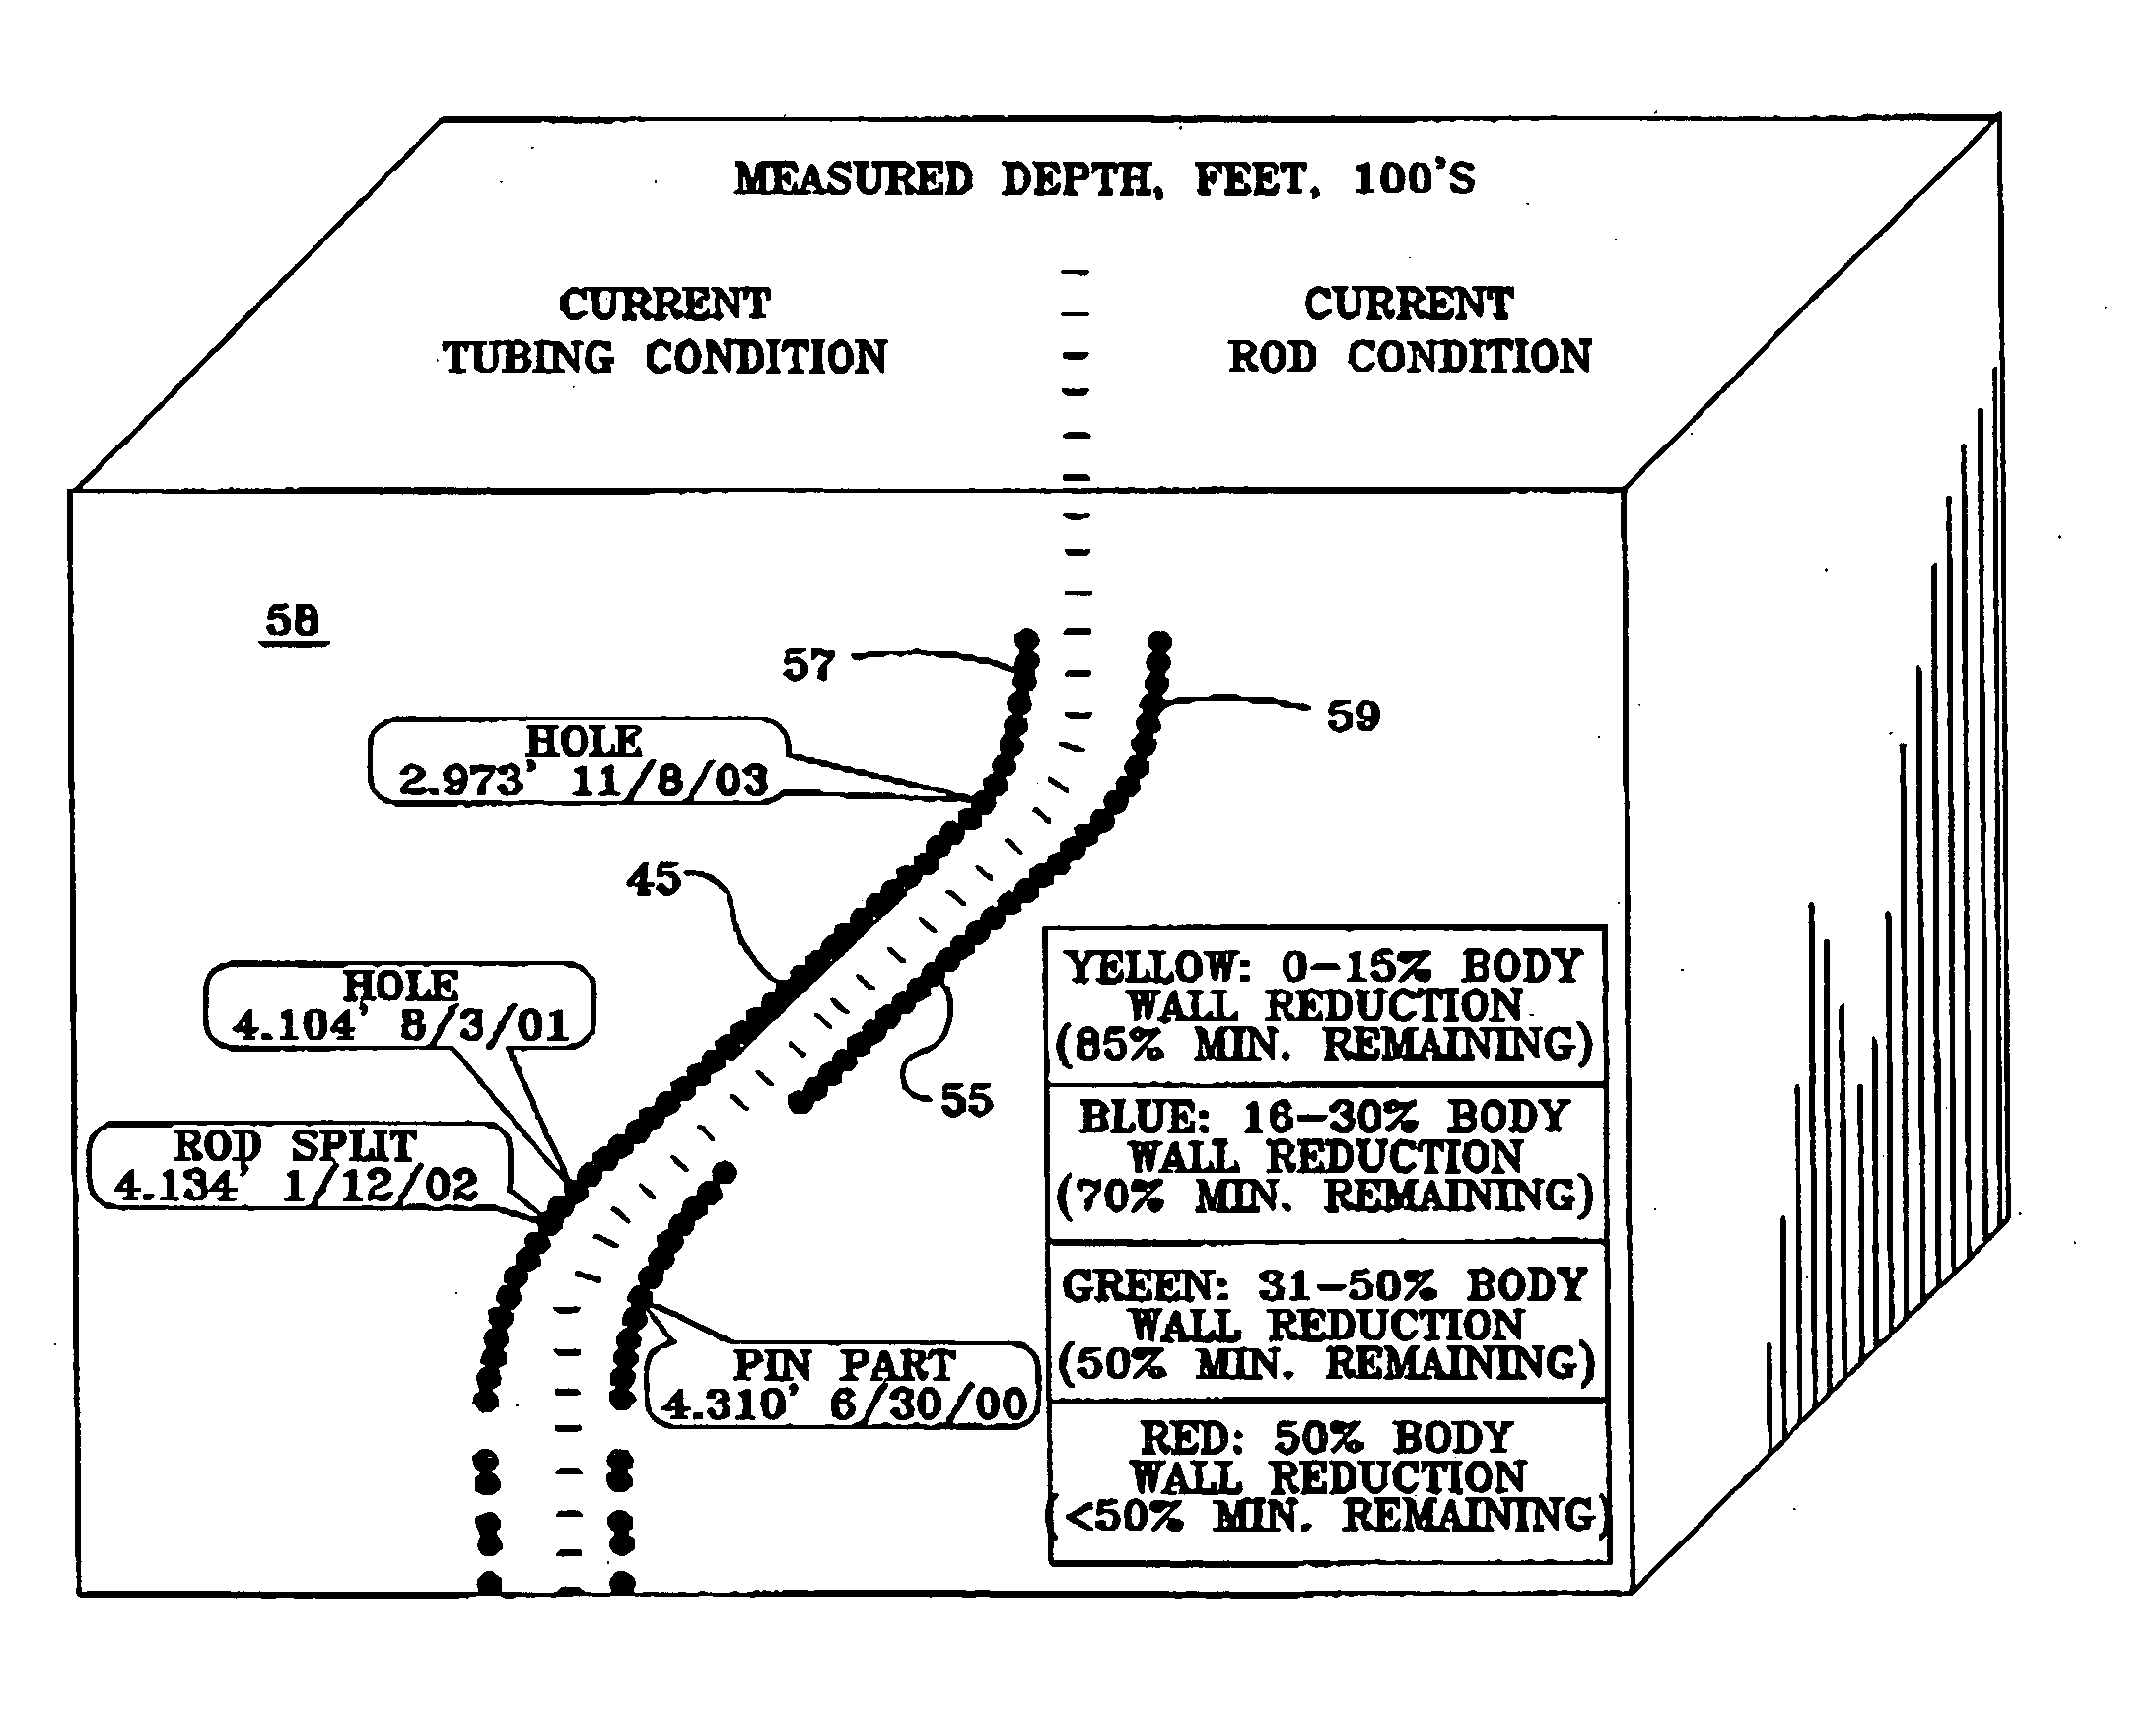 Wellbore evaluation system and method